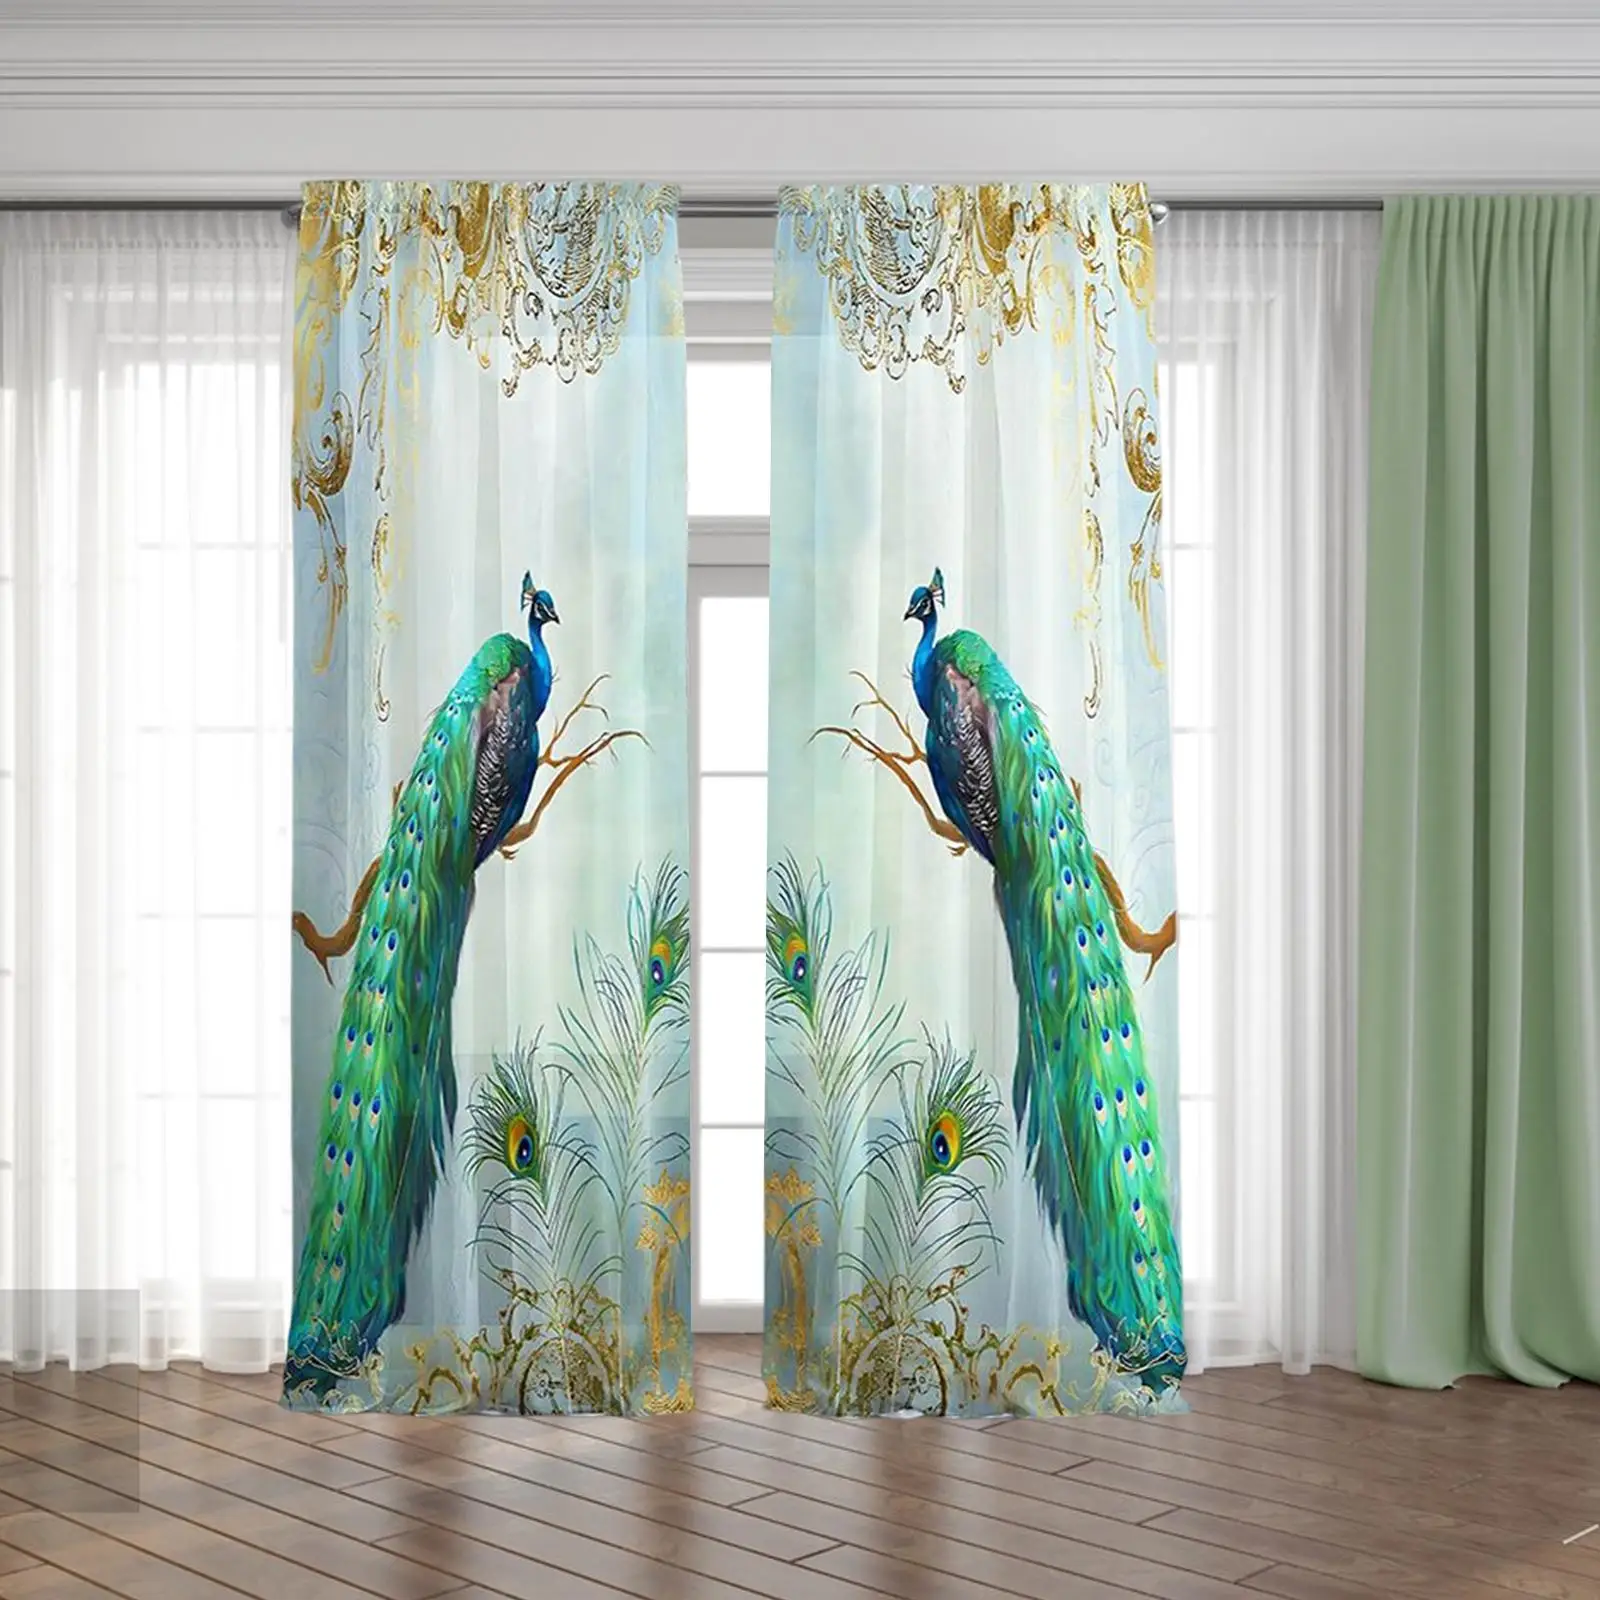 Peacock Window Curtains Privacy Drapes Panels Window Treatments Luxurious Light Filtering Window Curtain for Bathroom Doorway